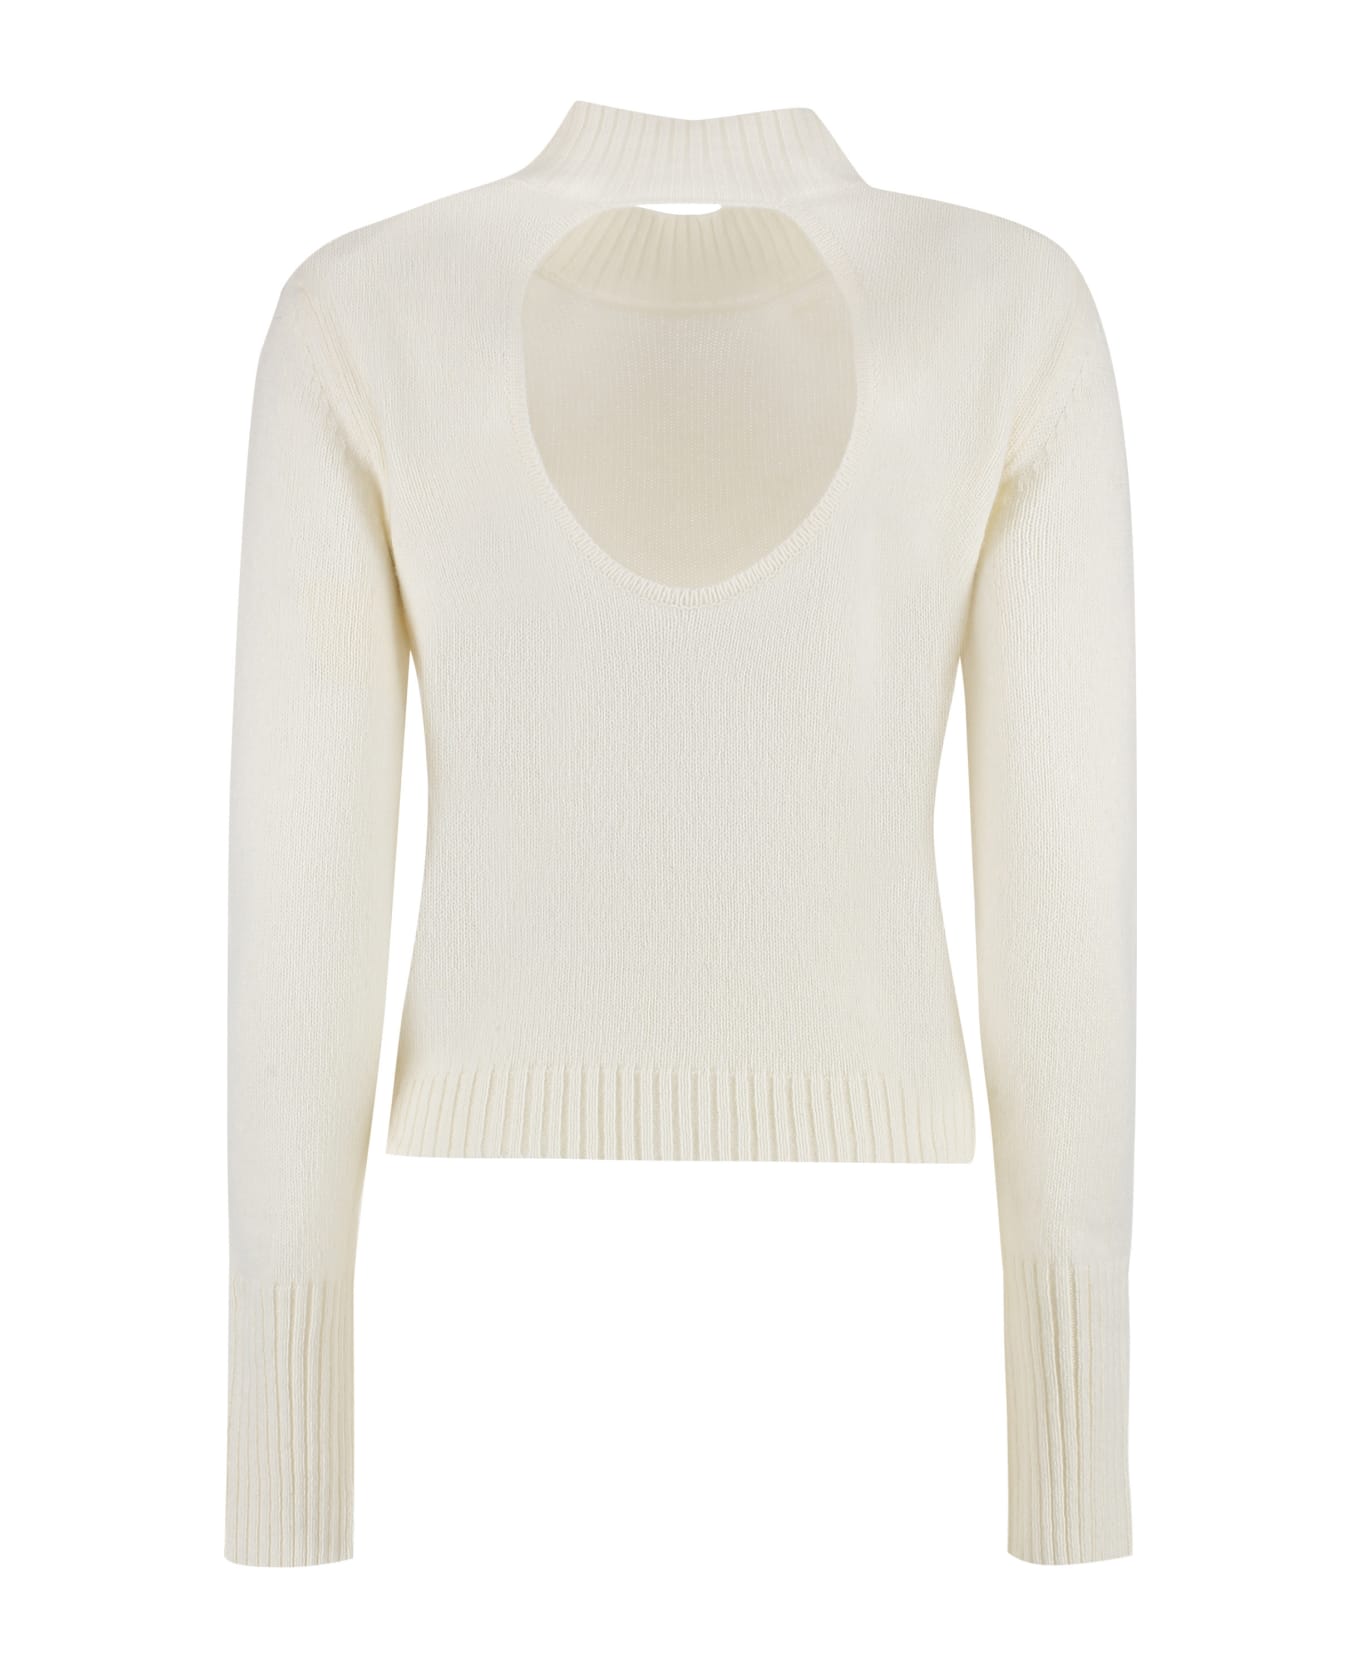 Federica Tosi Wool And Cashmere Sweater - panna